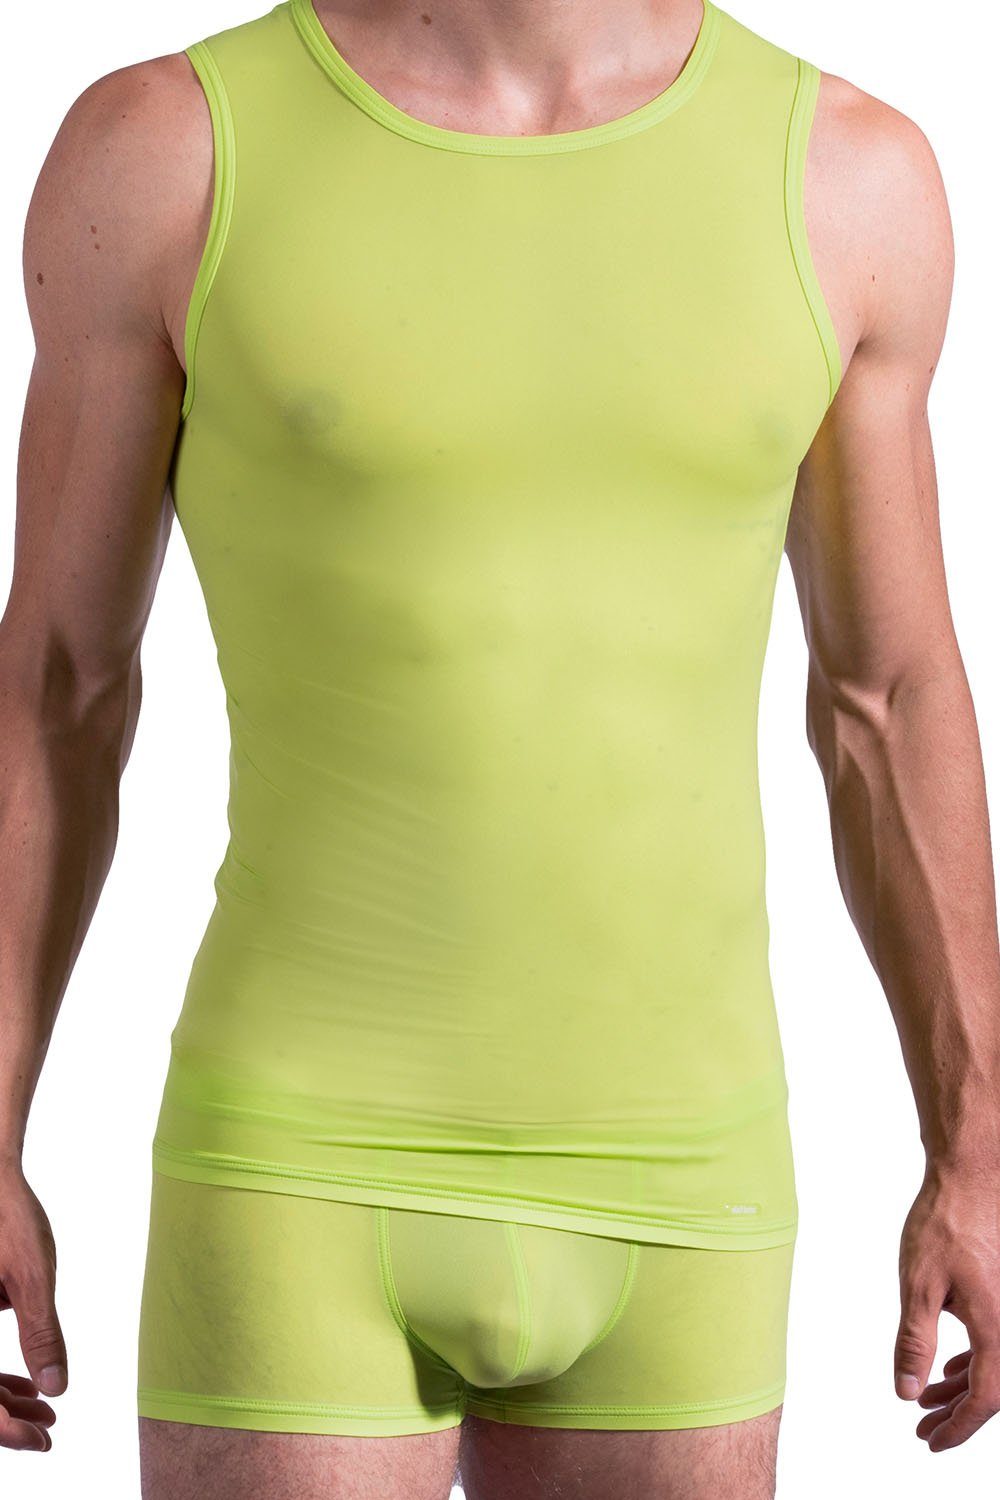 106025 lime Tanktop Muskelshirt Benz green Olaf